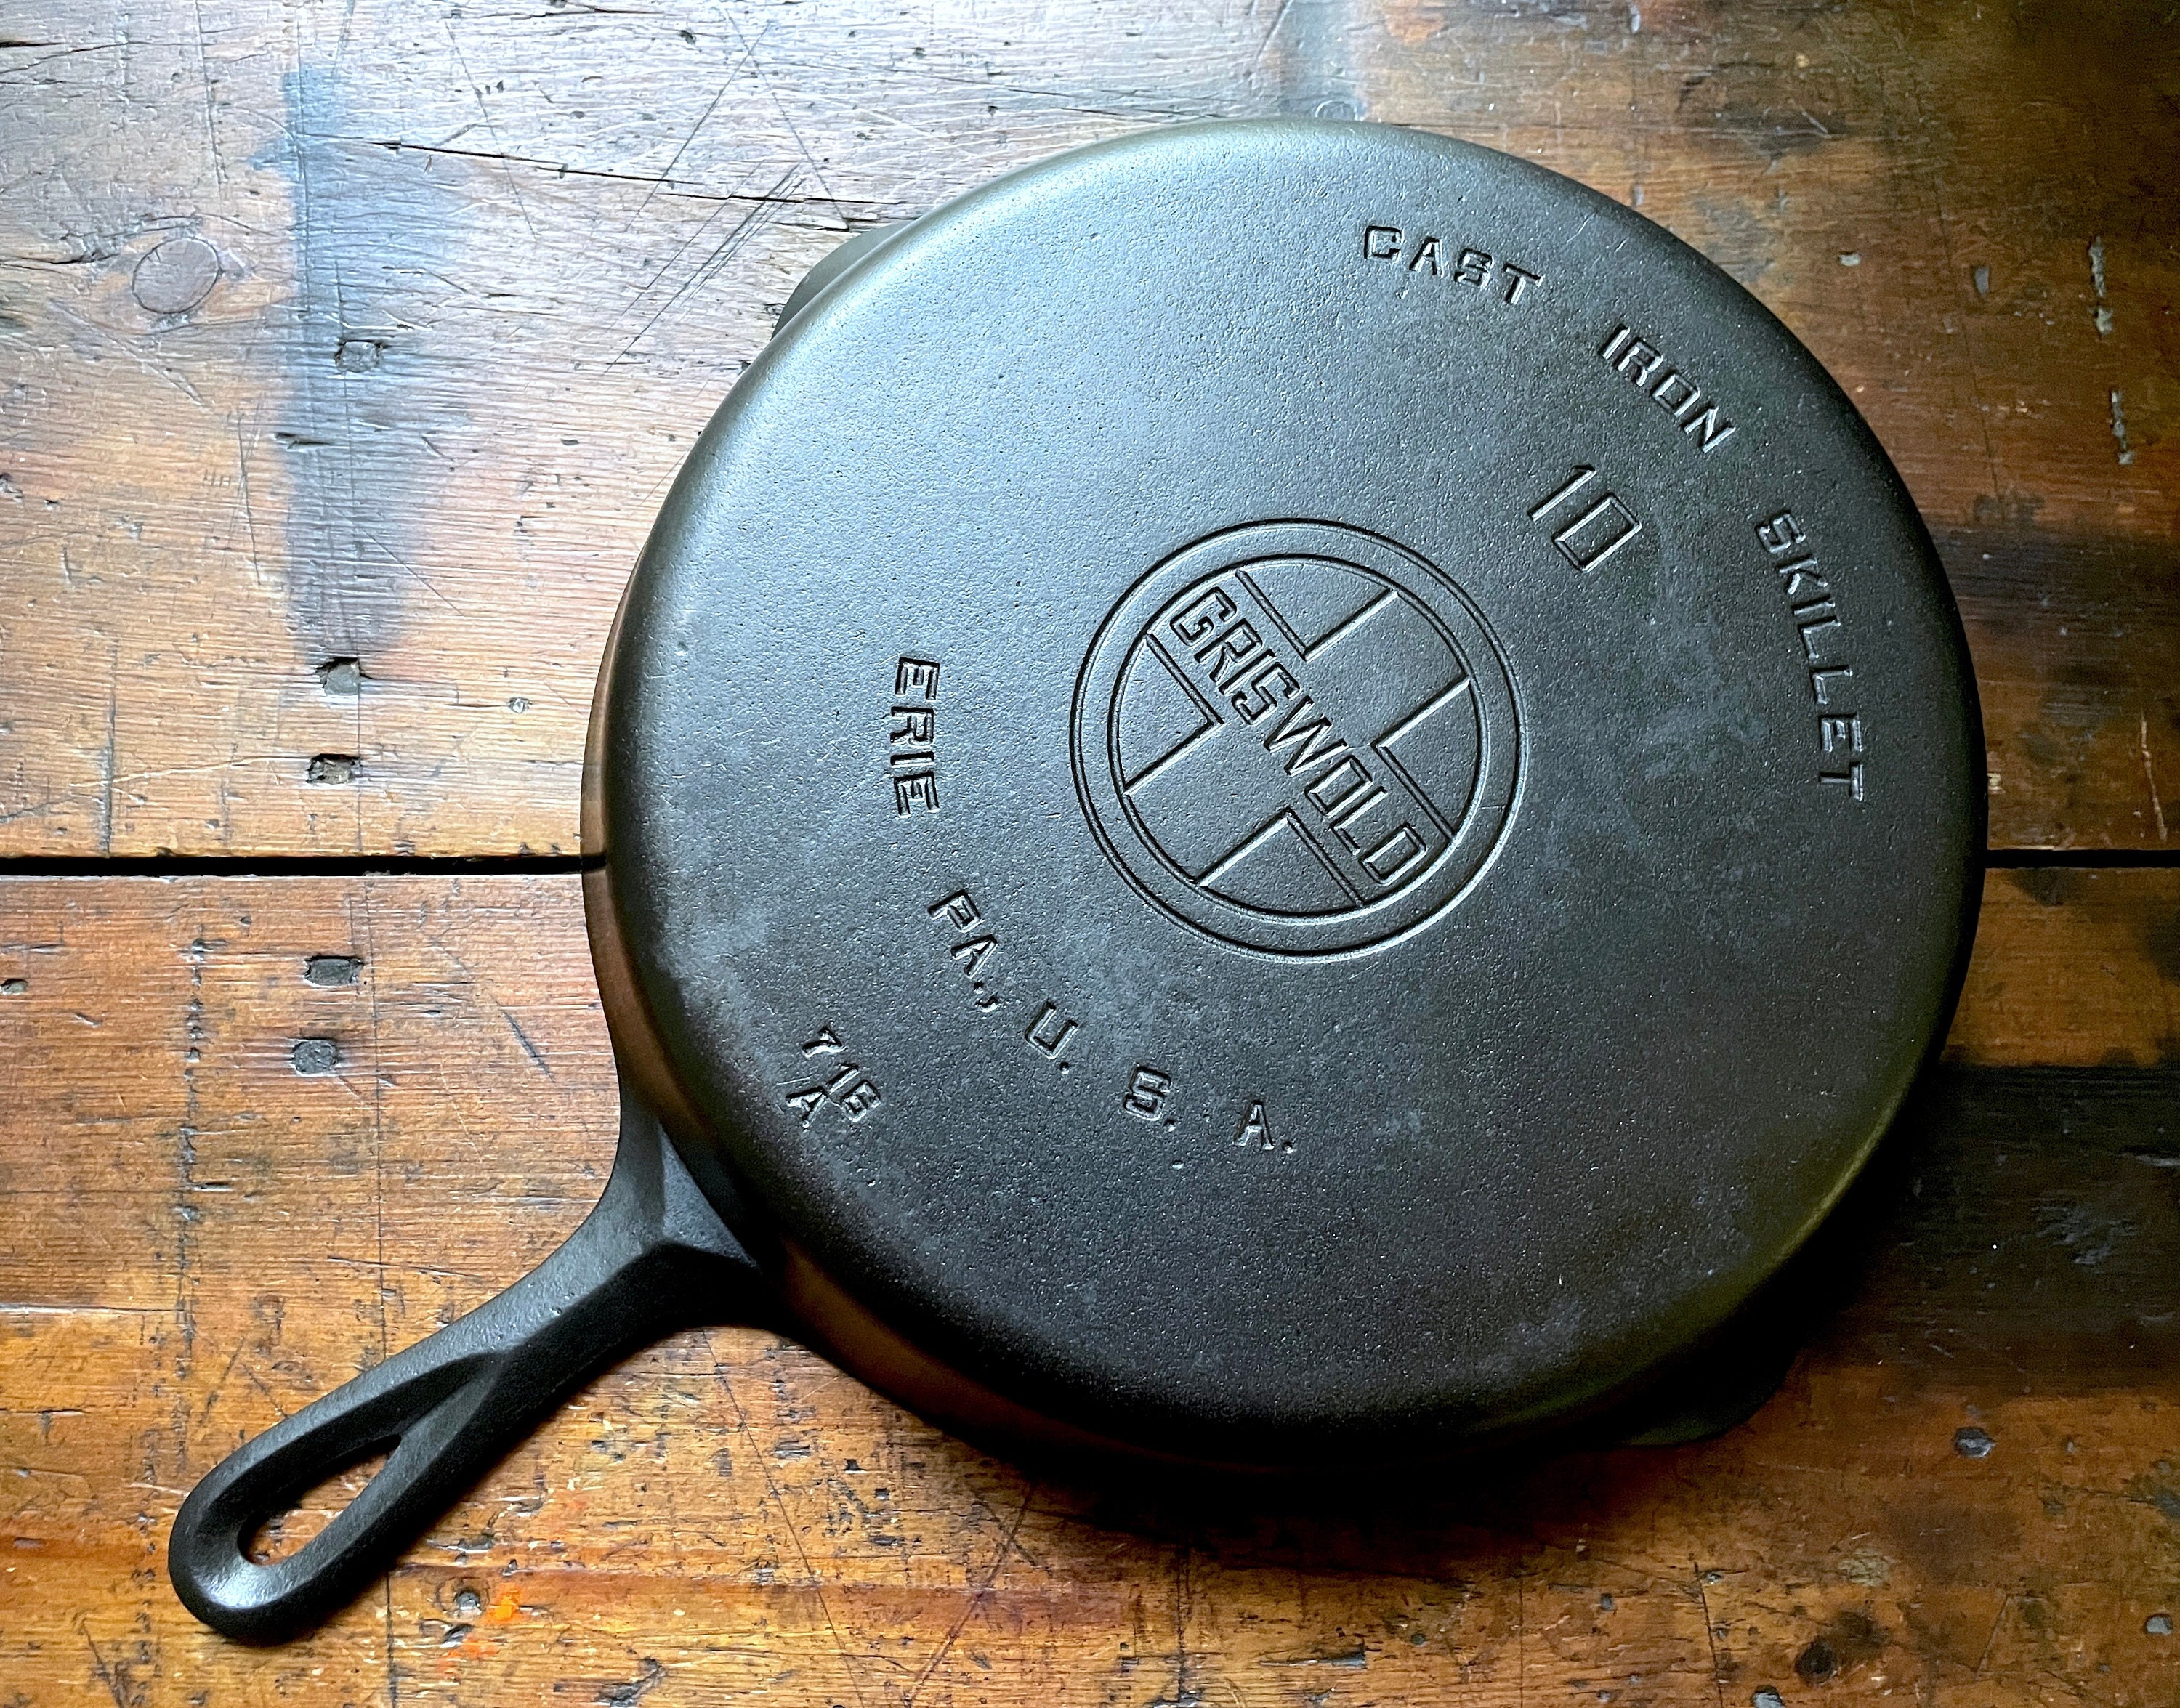 2 Vintage Good Health Cast Iron Skillets by Griswold, #3 & #6